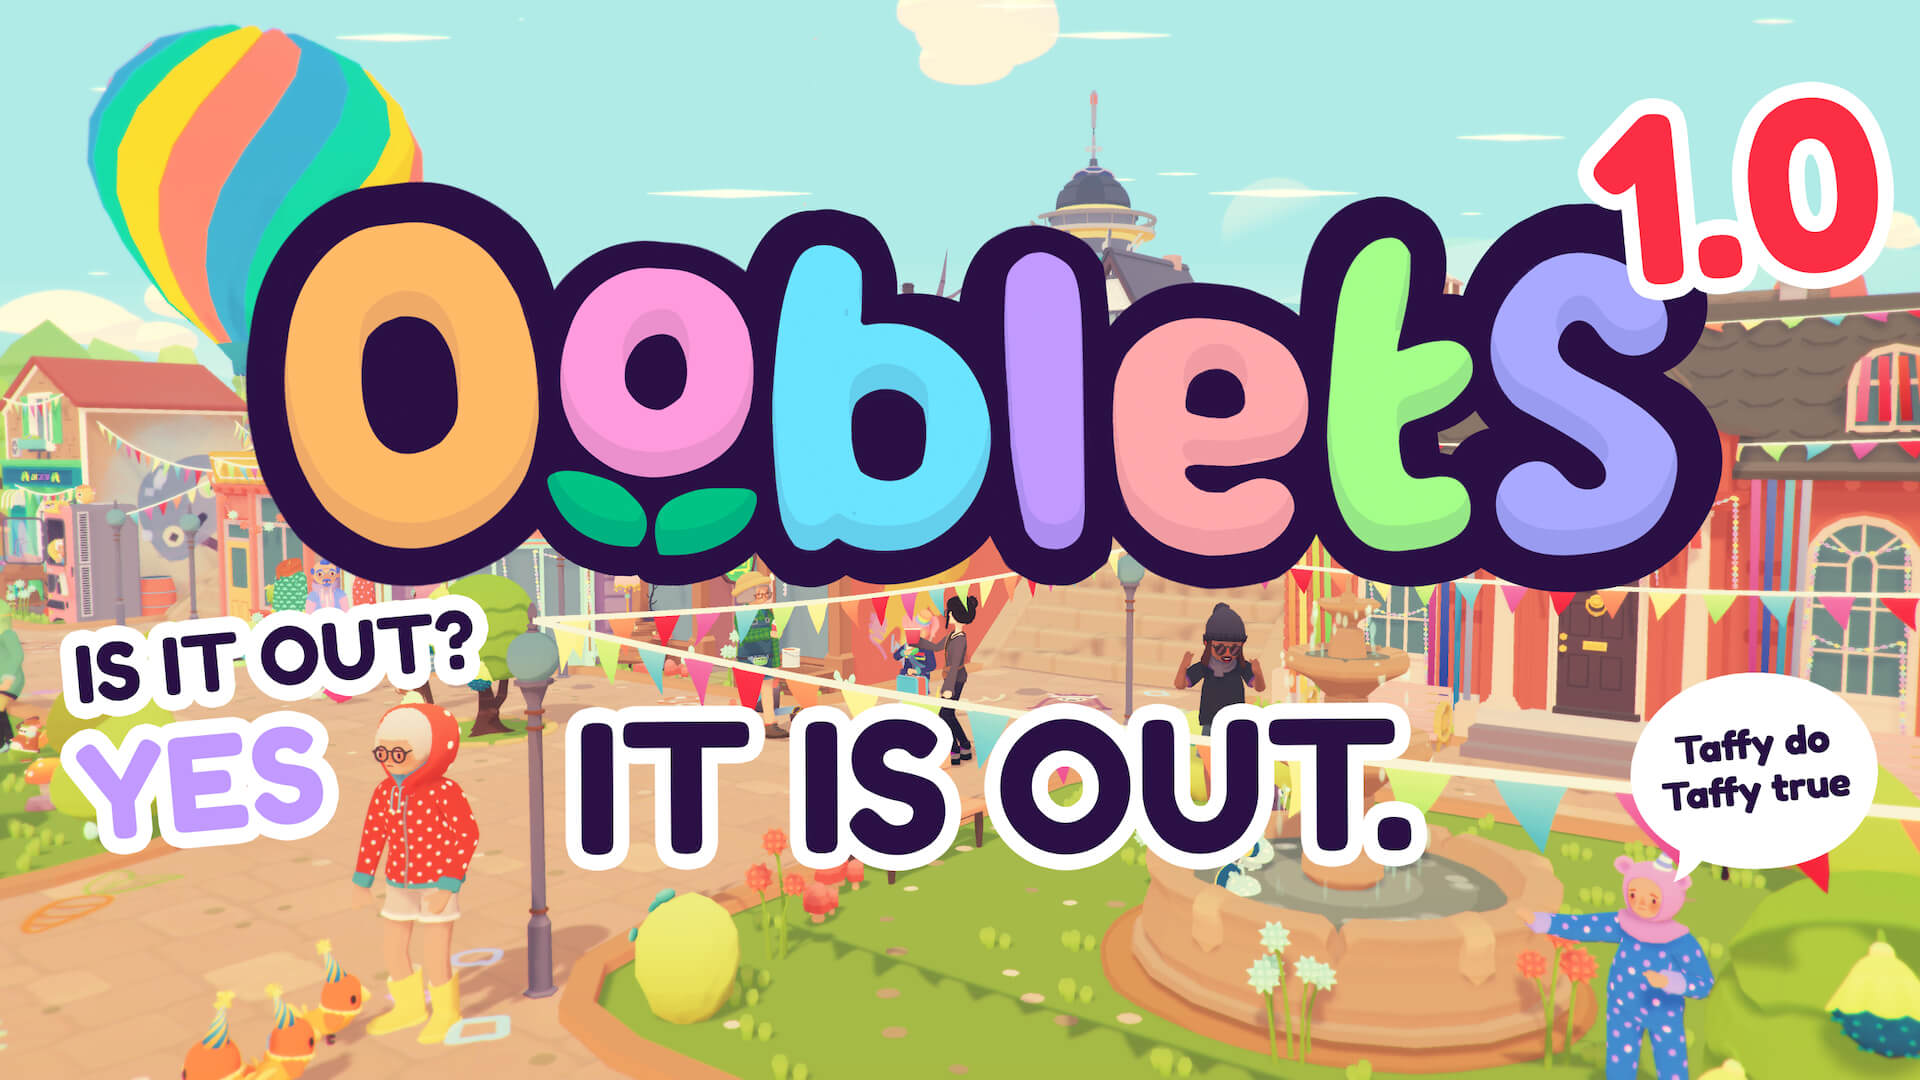 Ooblets now! is out 1.0